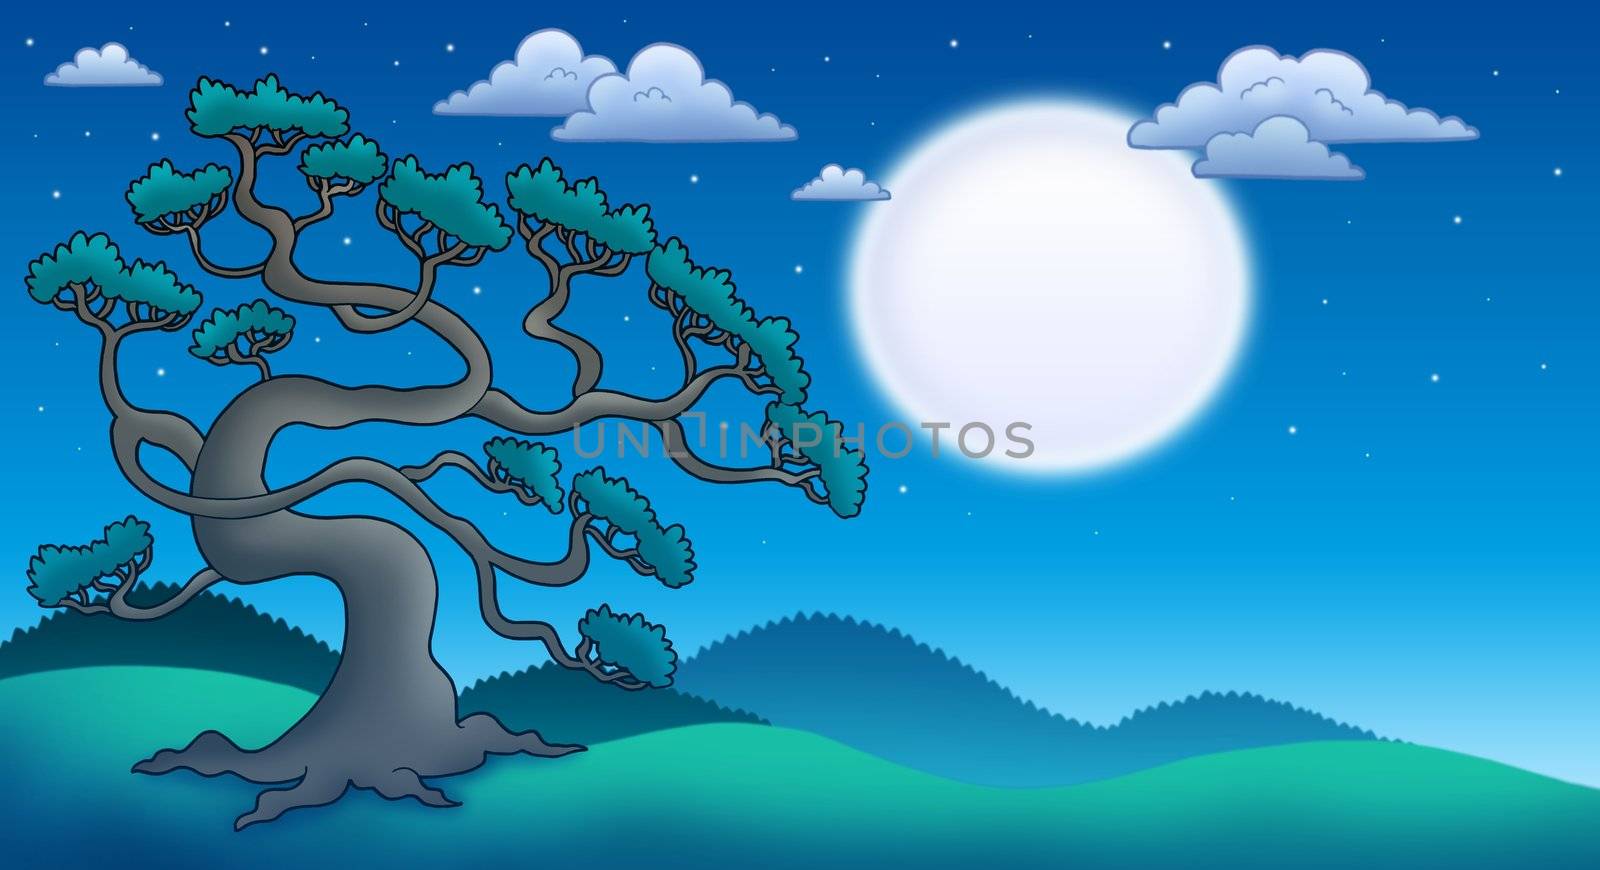 Night landscape with old pine tree - color illustration.